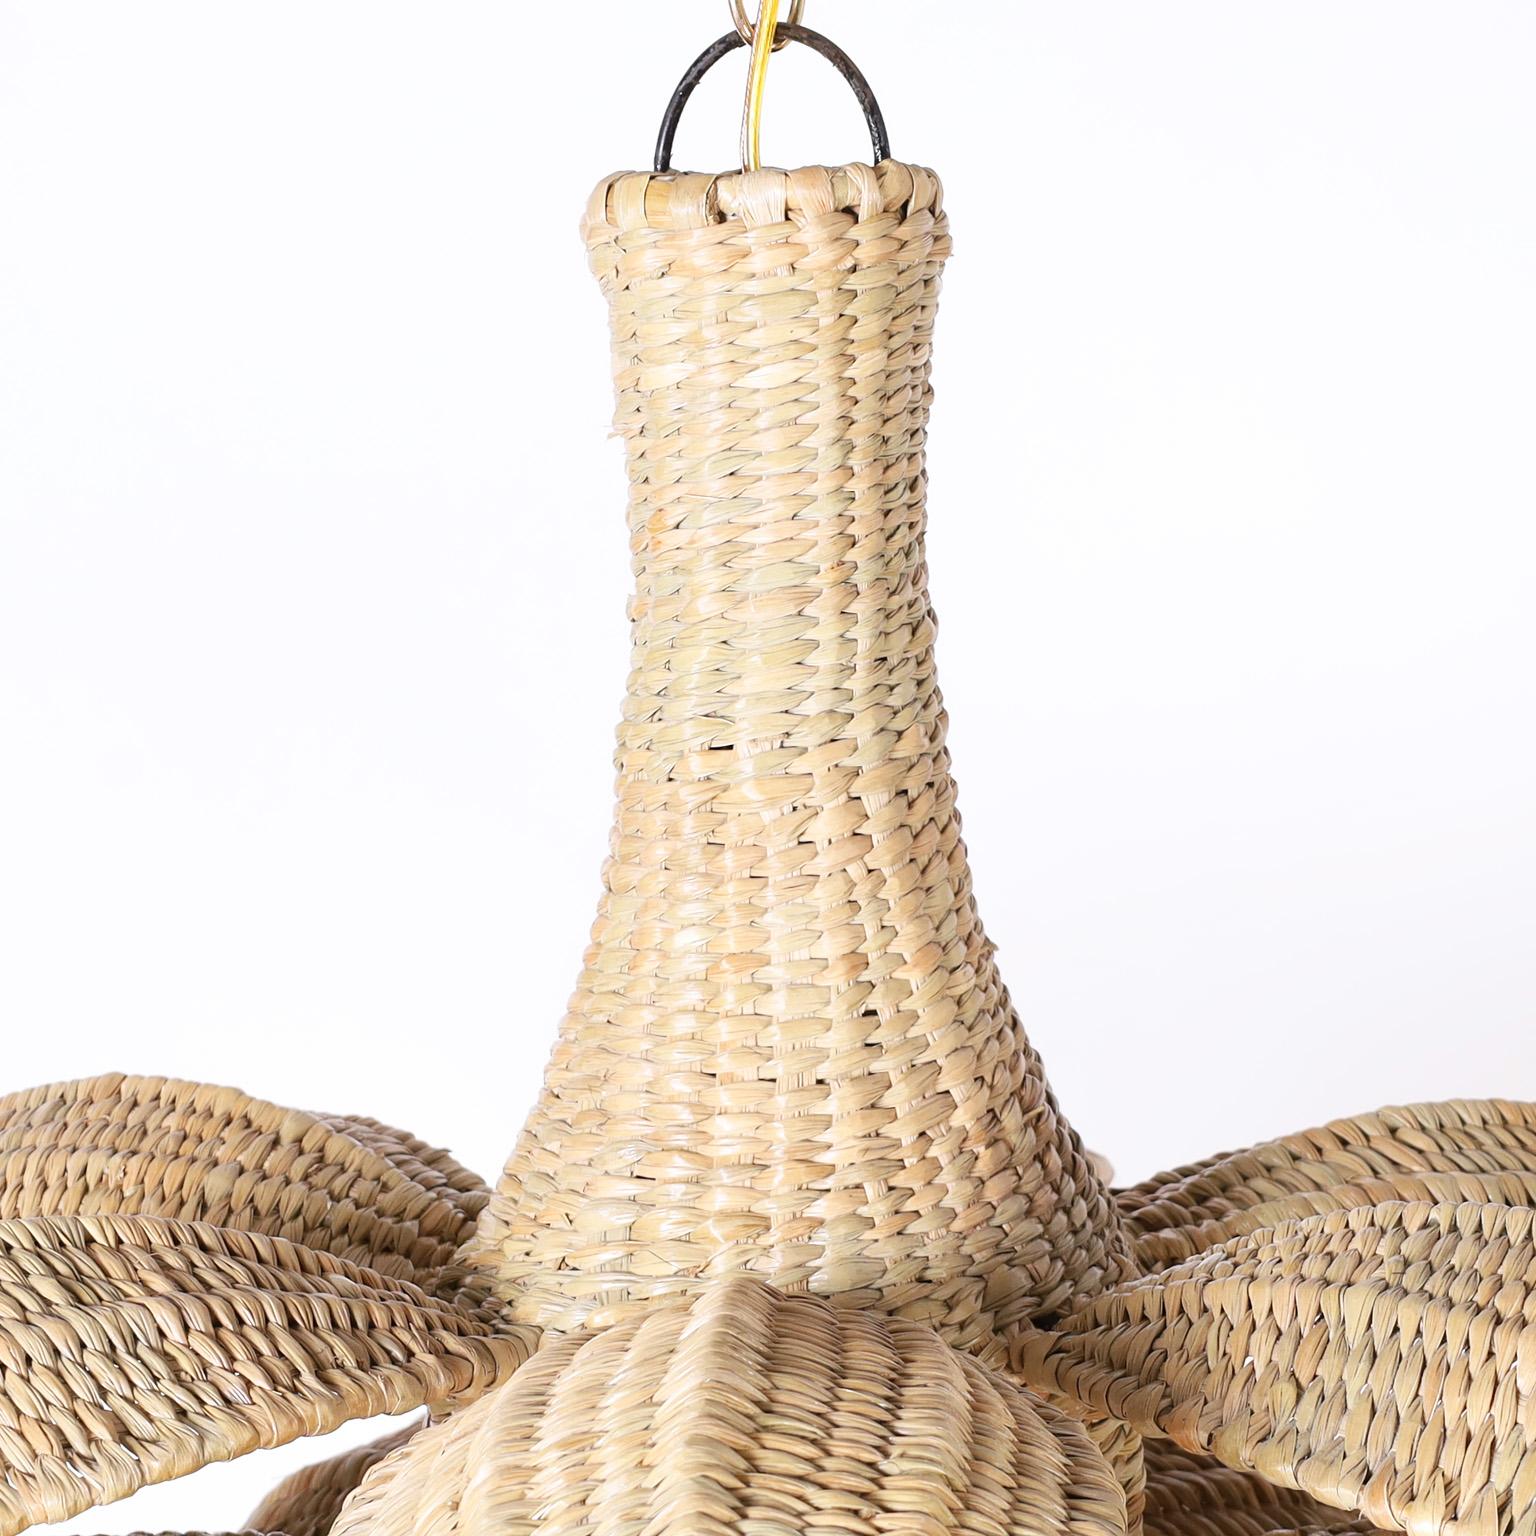 Wicker palm leaf or lotus pendant light fixture crafted in chuspata reed tightly and expertly woven over a sturdy metal frame with three tiers of palm leaves, exclusively designed and offered by F.S. Henemader antiques as part of the FS Flores